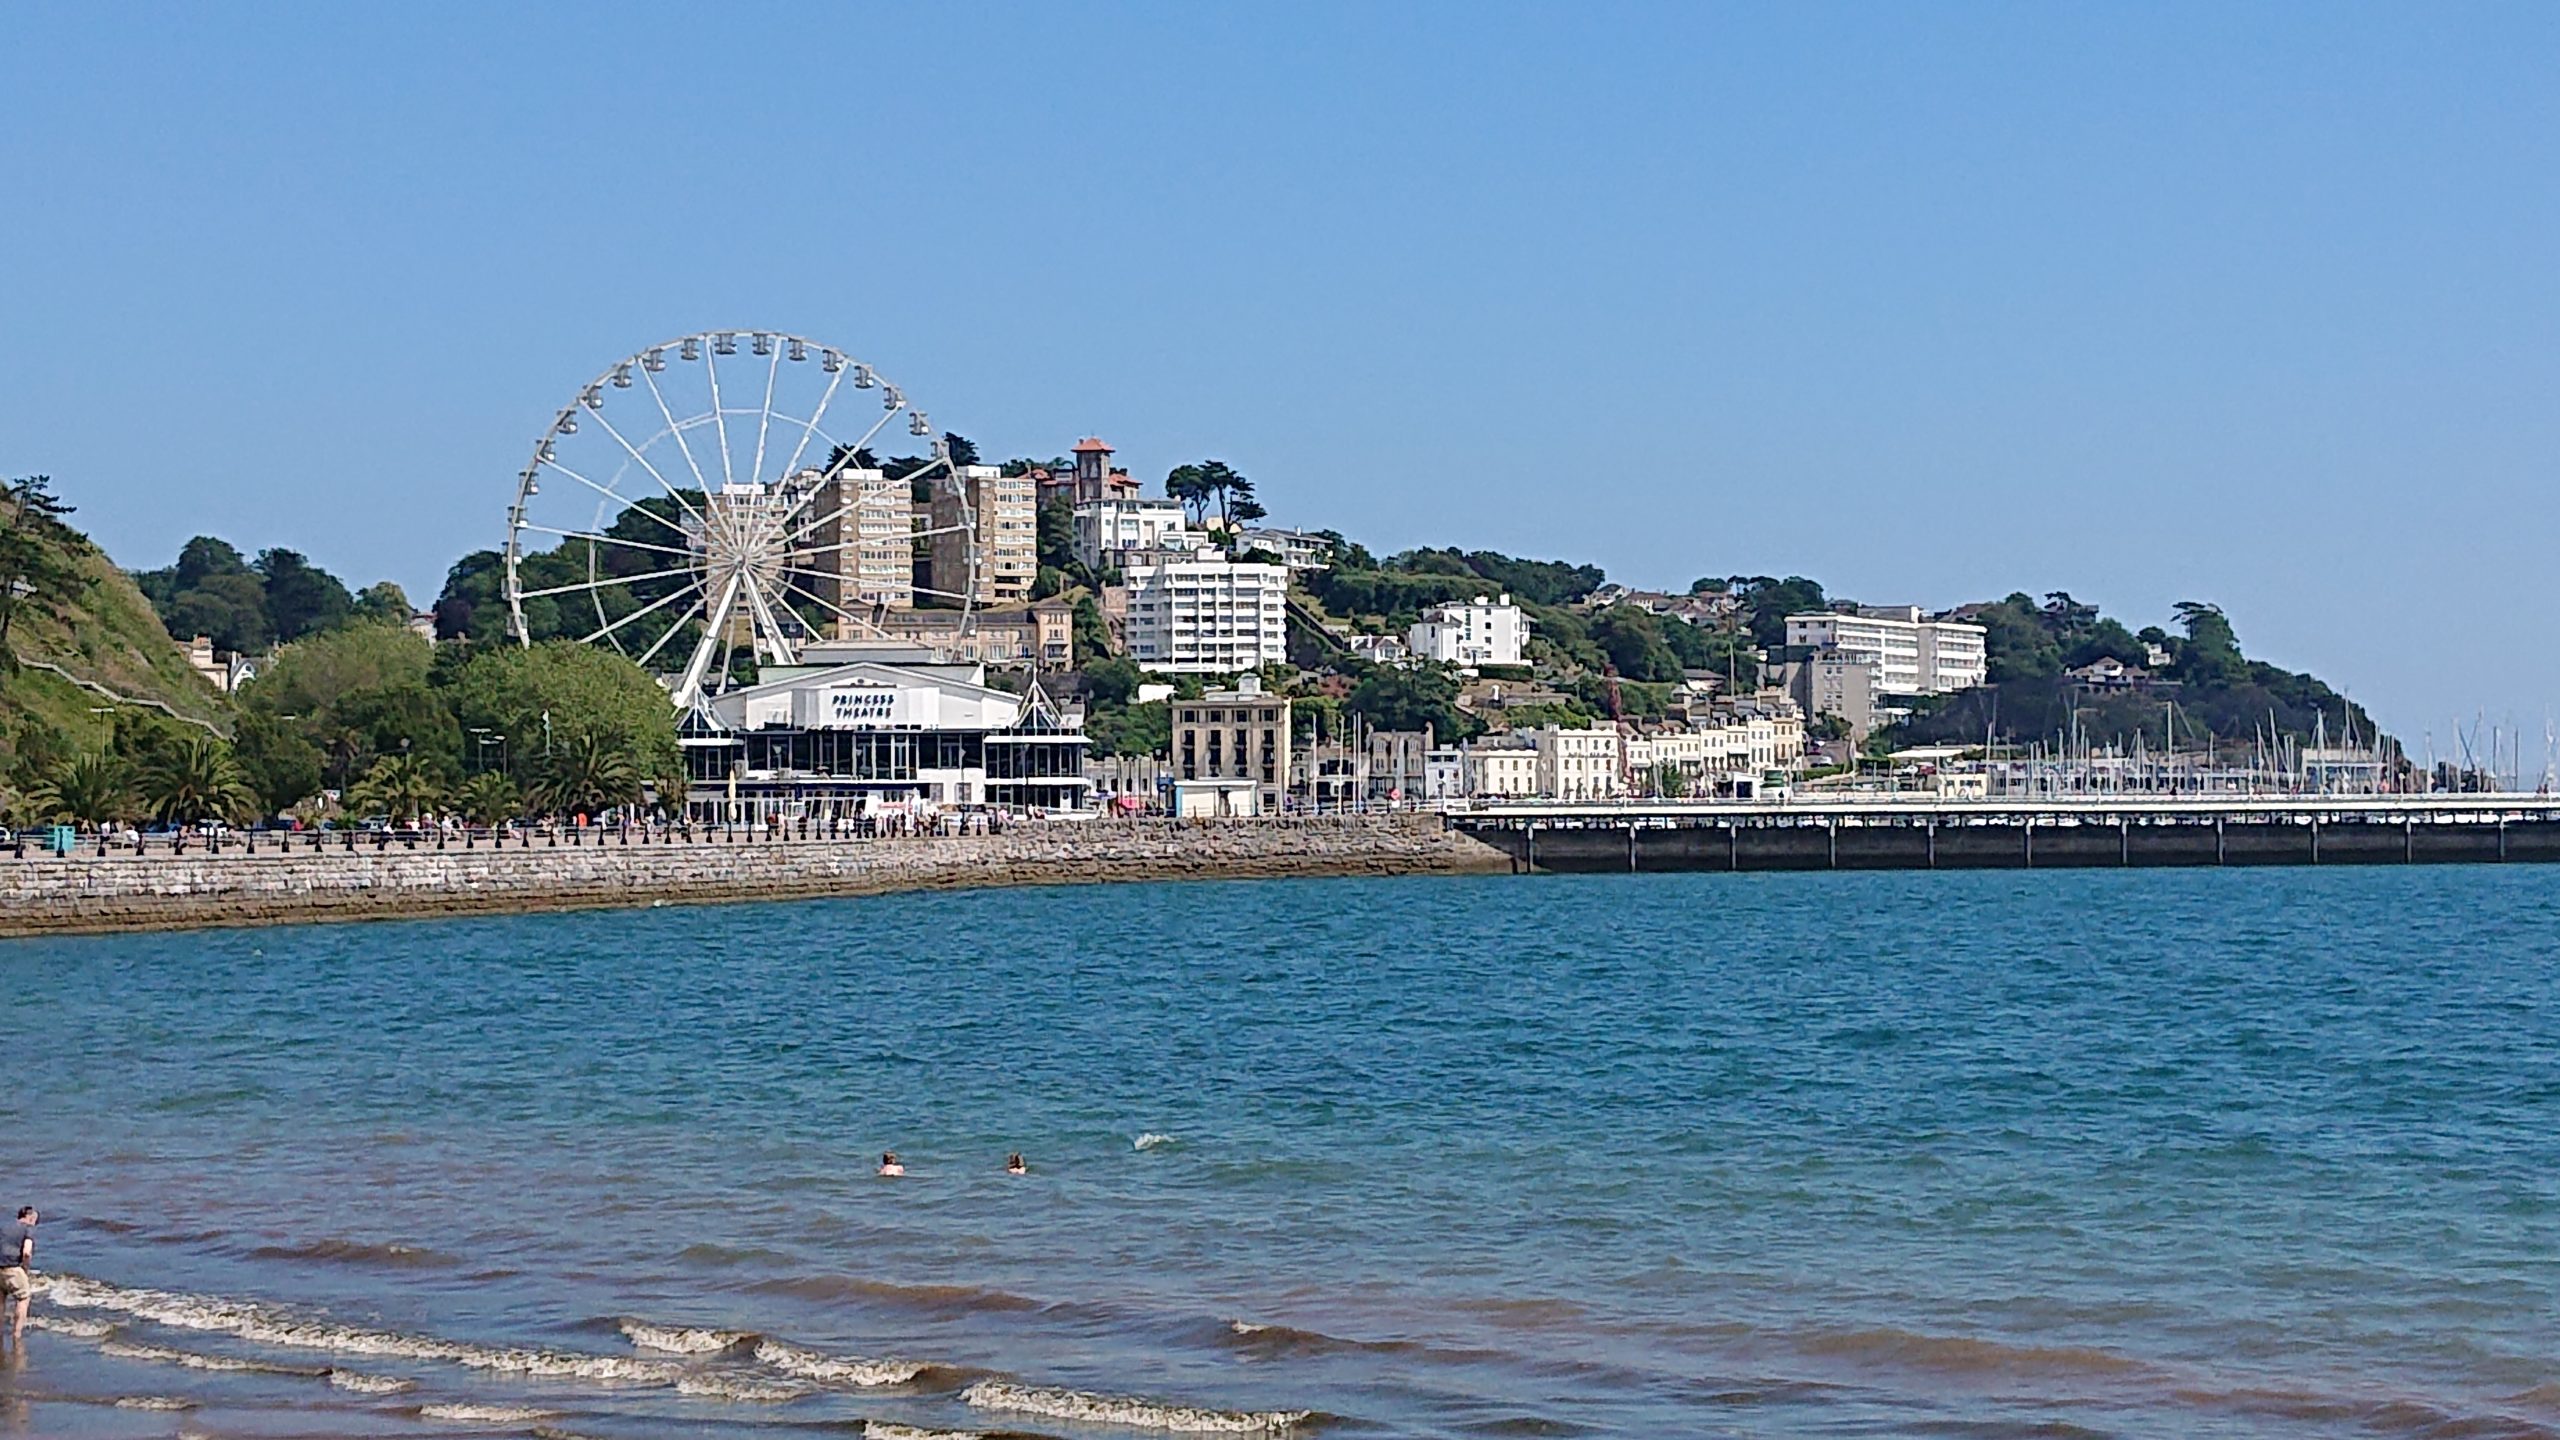 Torquay B&B Lower Prices. Tor Dean has great reviews,